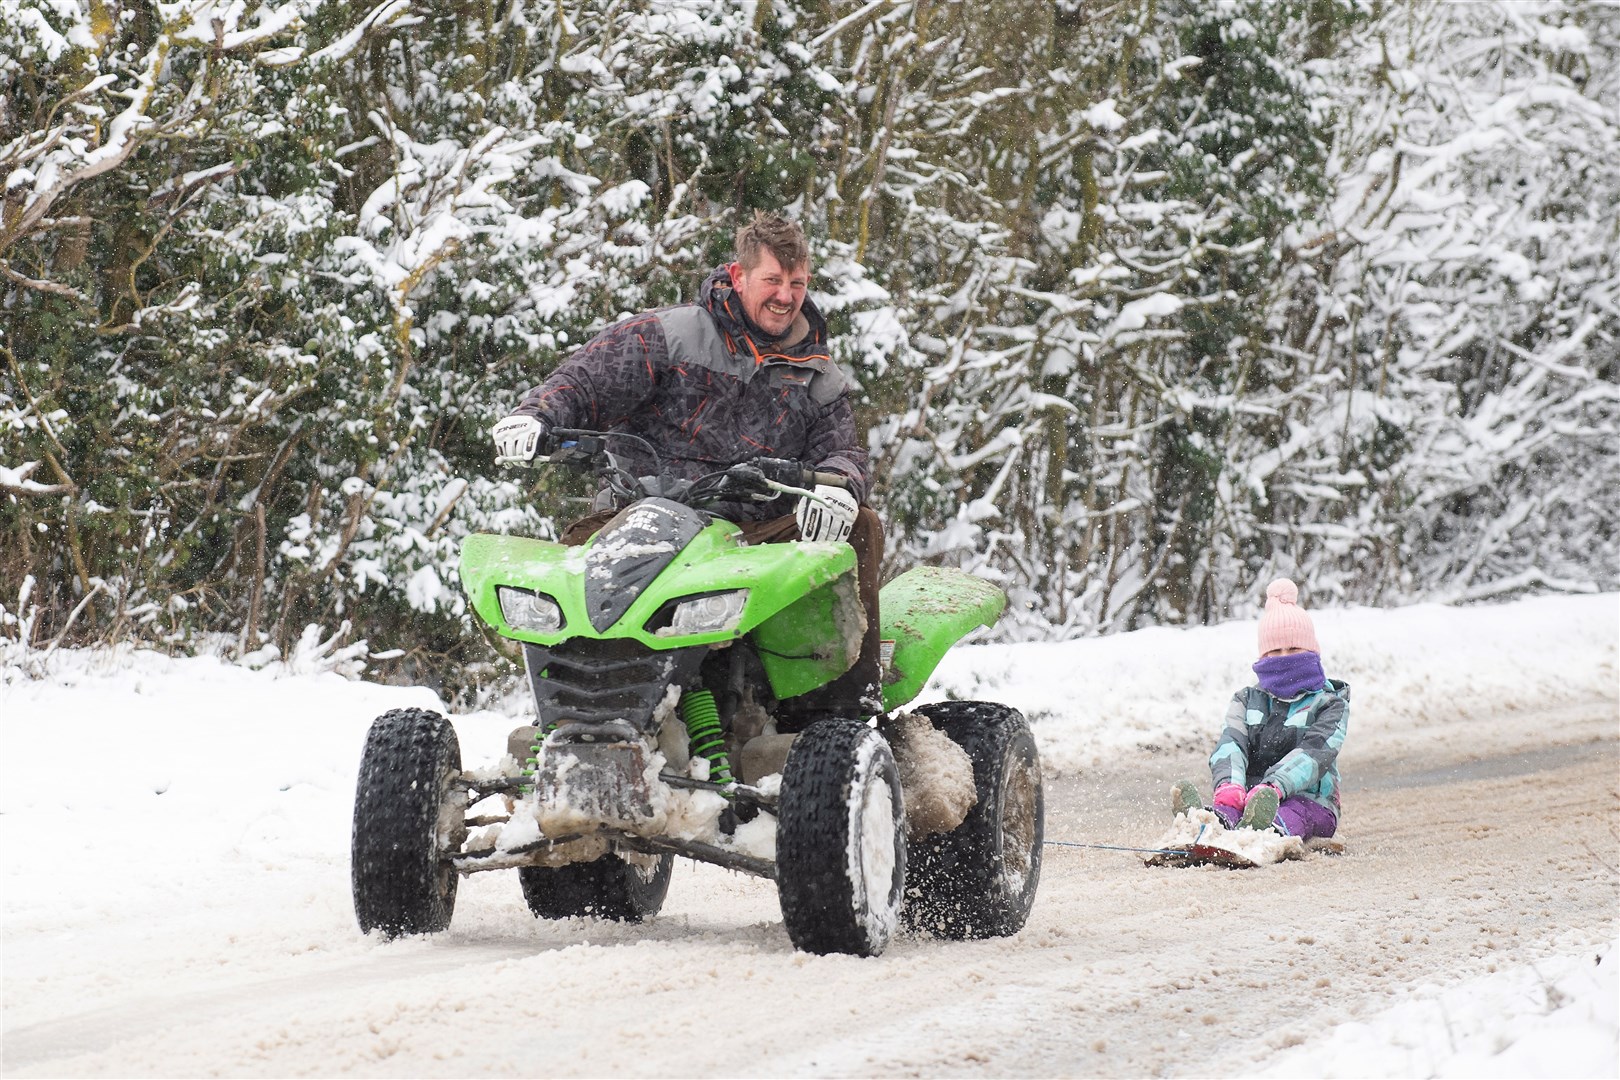 Richard Squirrell uses a quad bike to give his granddaughter Florence a ride in the snow in Wattisham in Suffolk (Joe Giddens/PA)